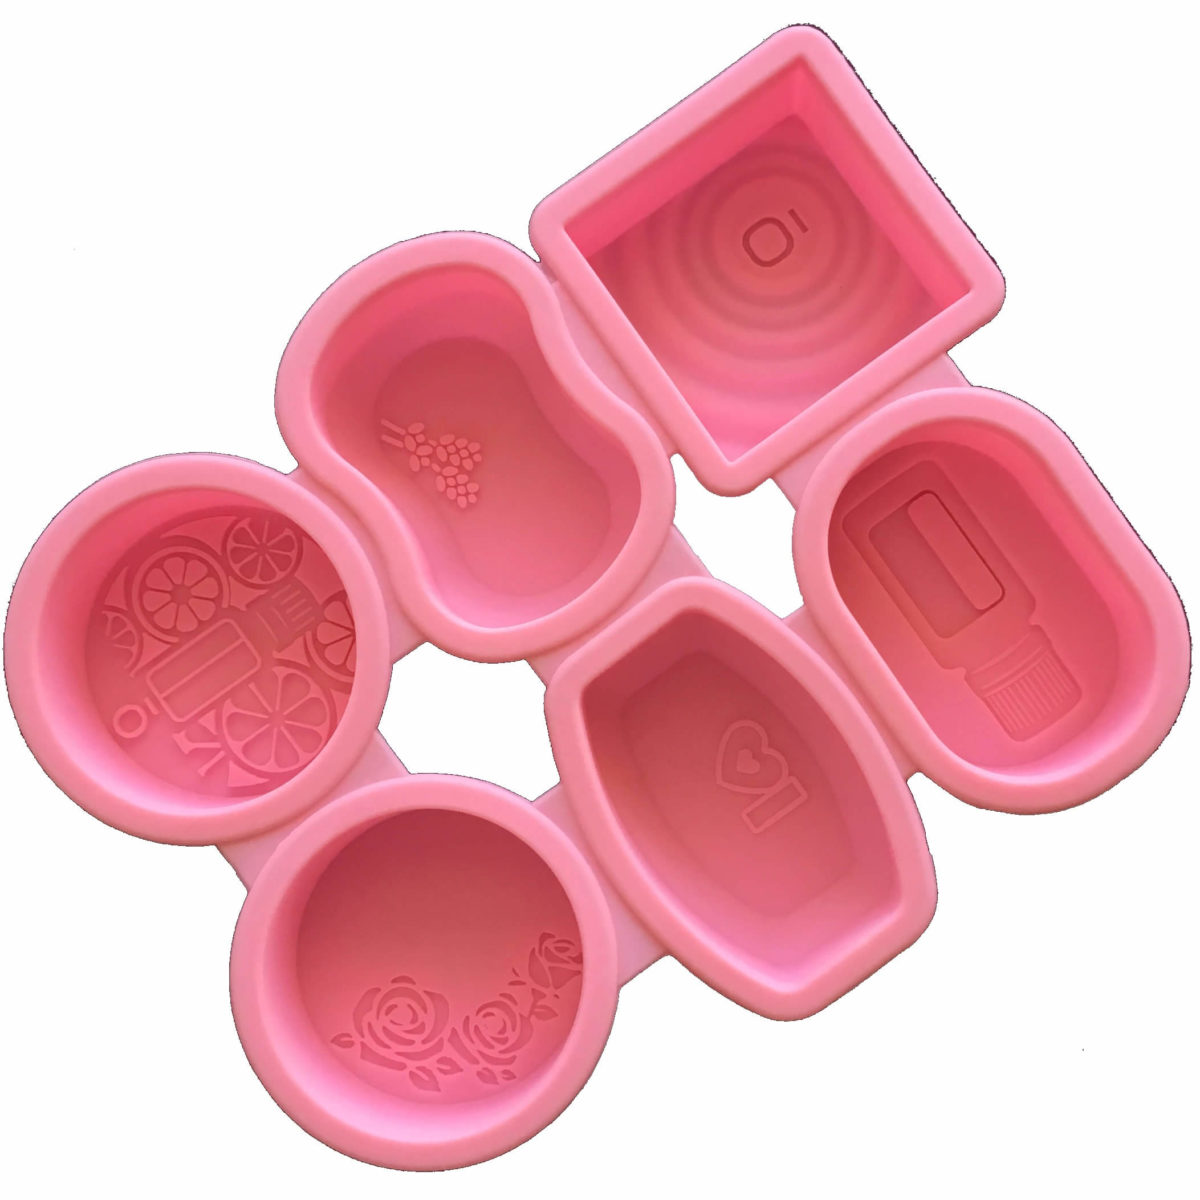 doterra essential oils six cavity pink silicone mould with six different cavity designs with an essential oil theme